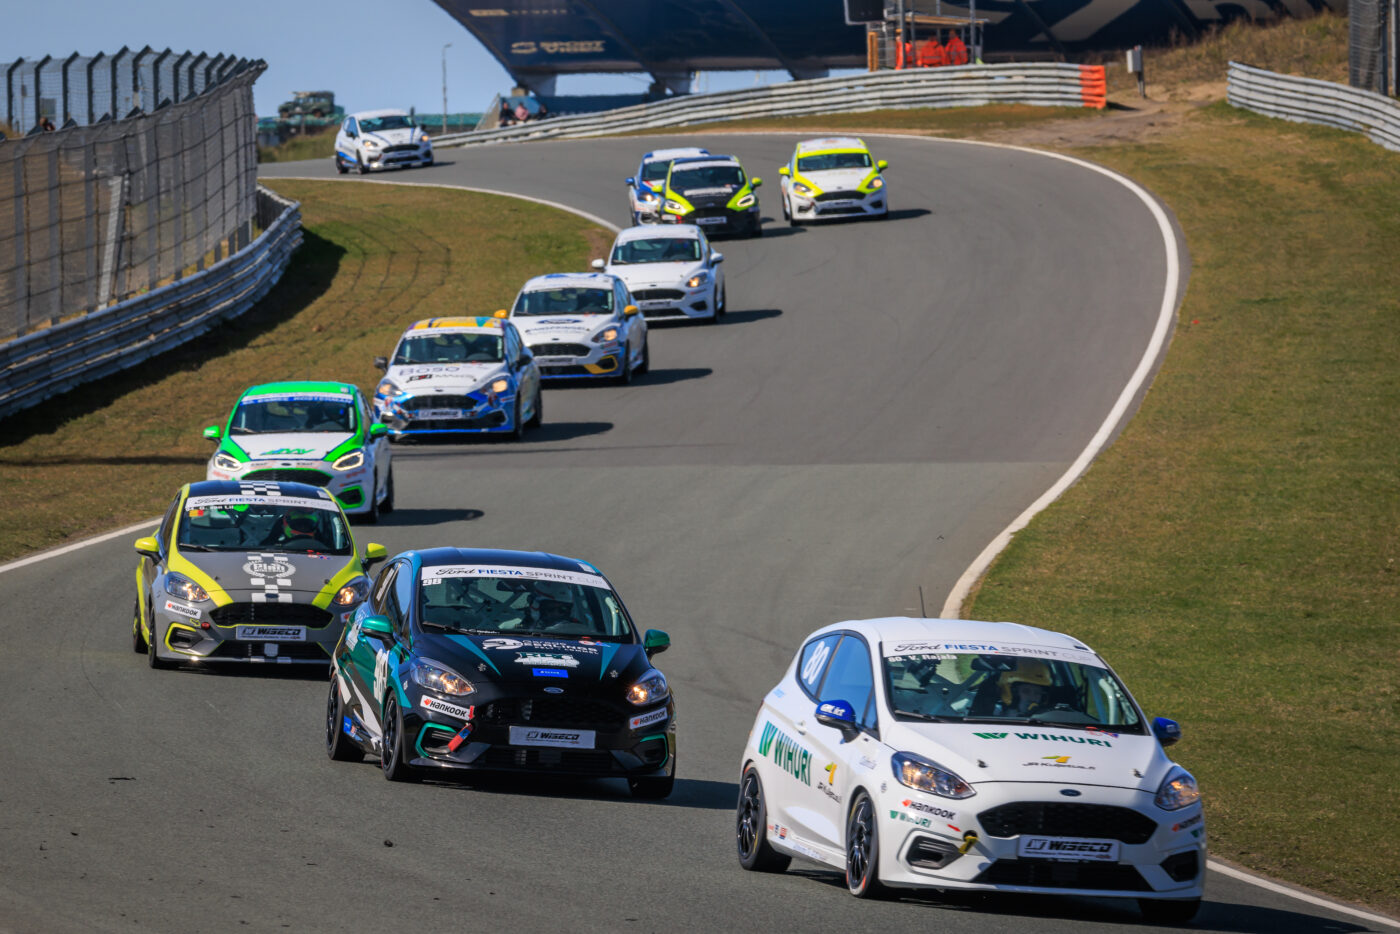 Strong Start for Veeti Rajala in the Ford Fiesta Sprint Cup